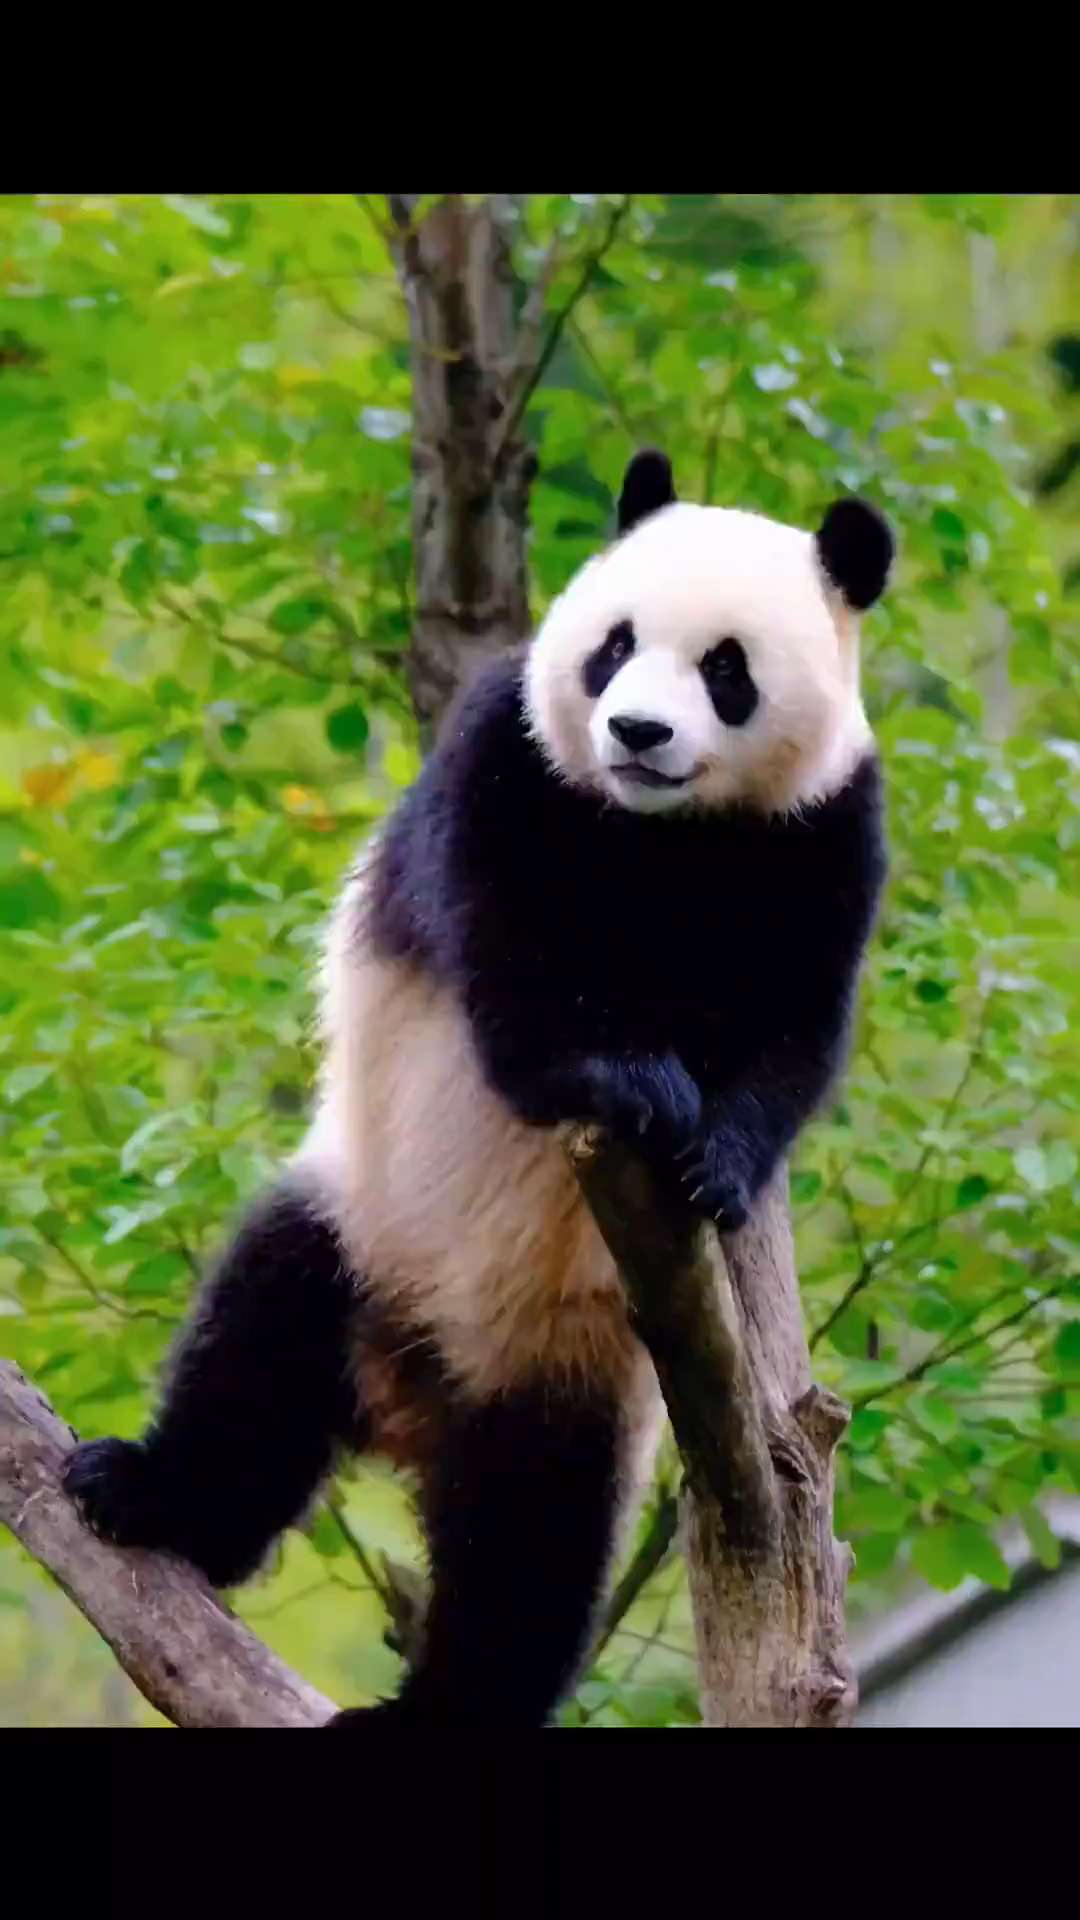 the panda swinging on a branch short MP4 video